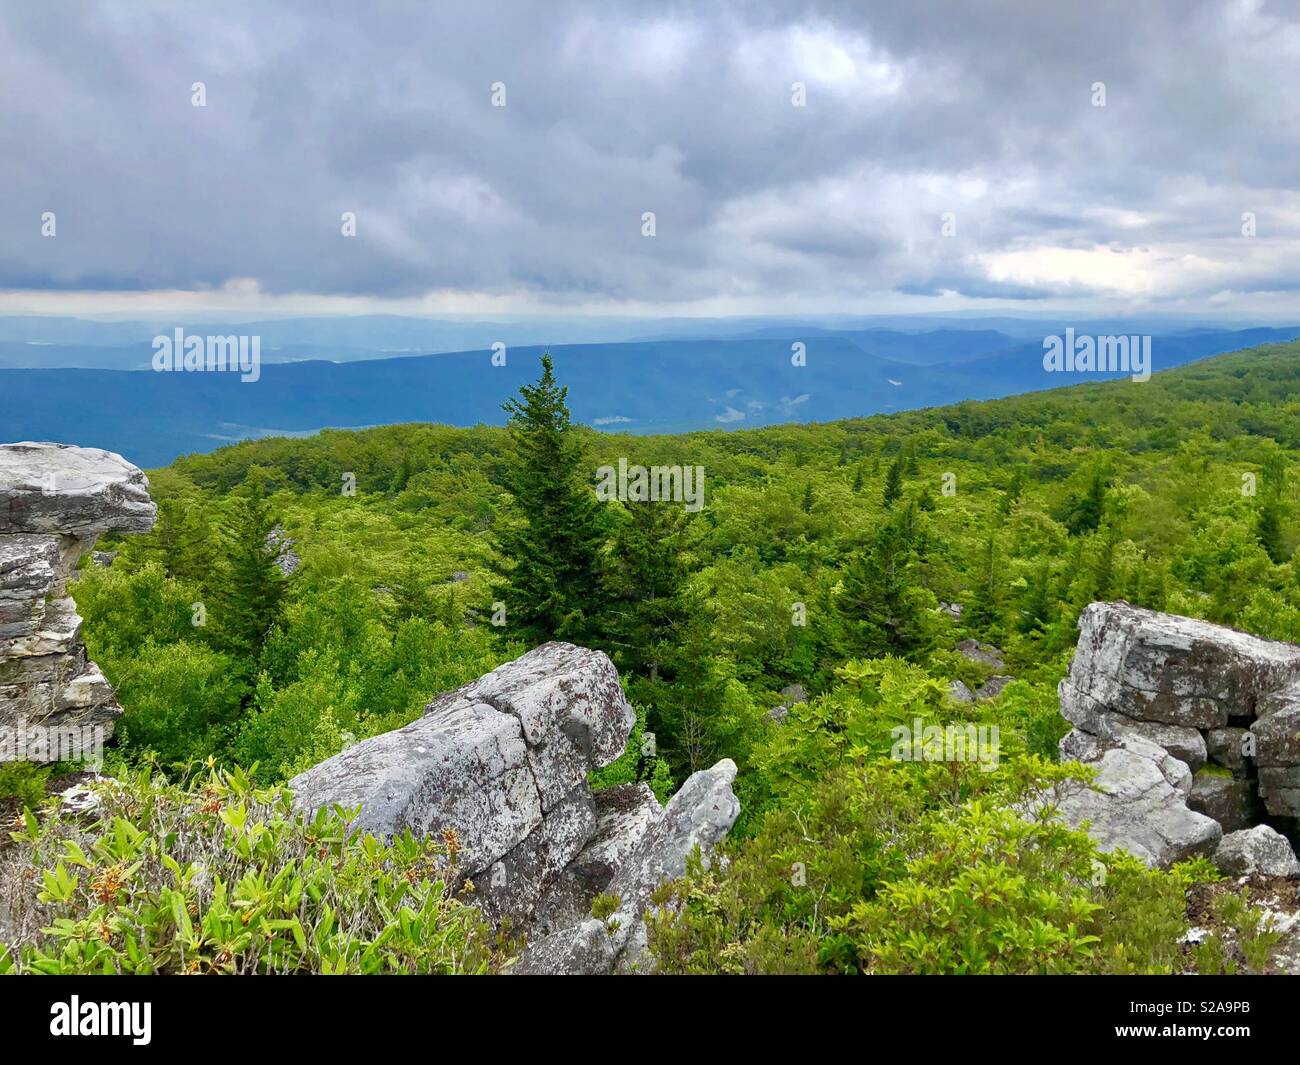 Dolly Sods, West Virginia a great place to go with the family and hike. Stock Photo